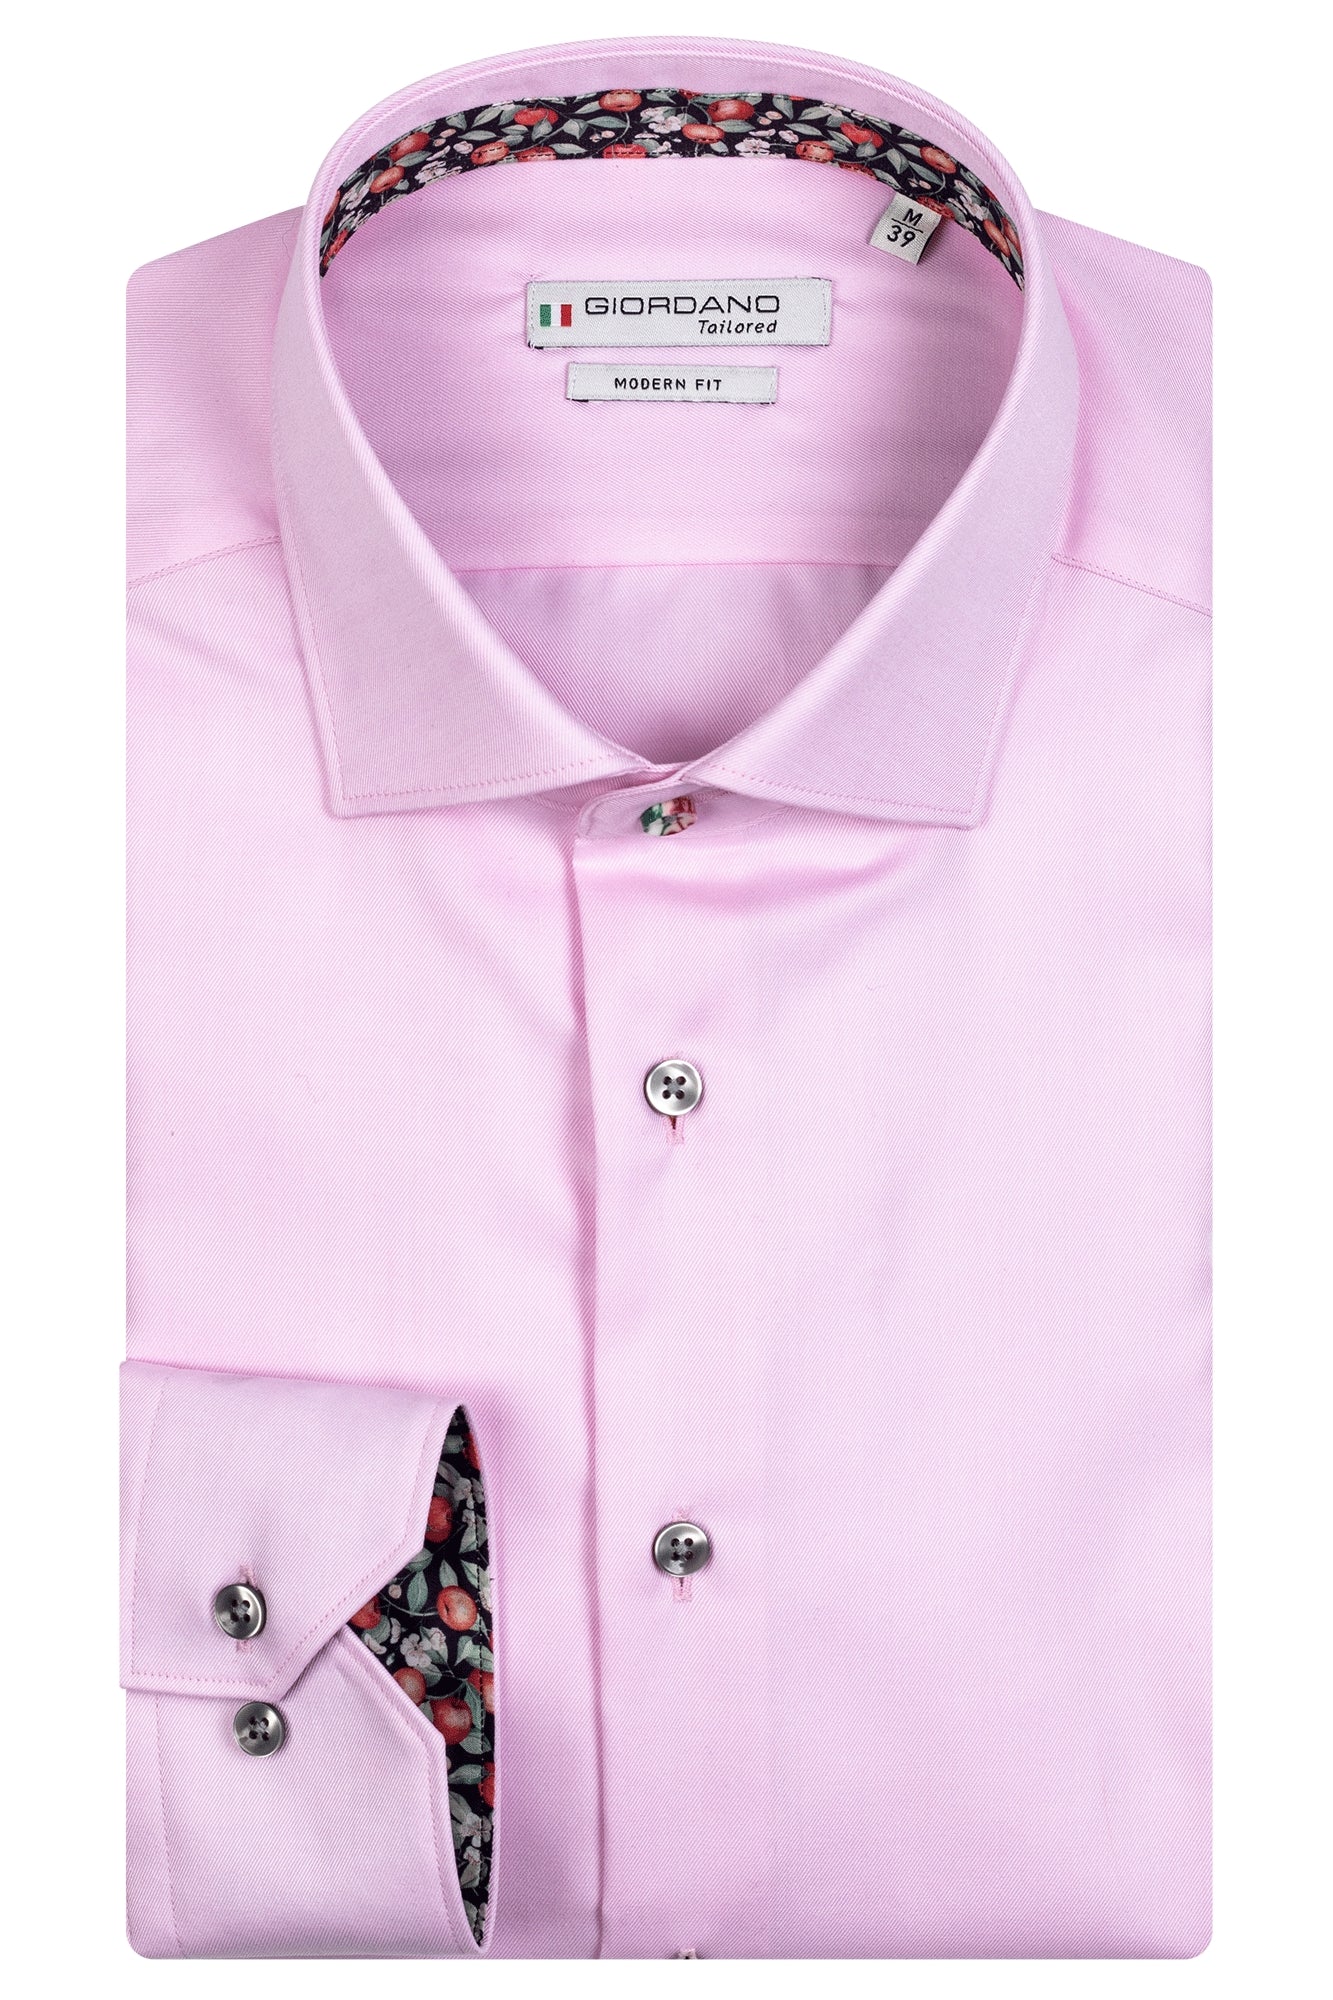 Liberty apples detailed pink shirt by Giordano